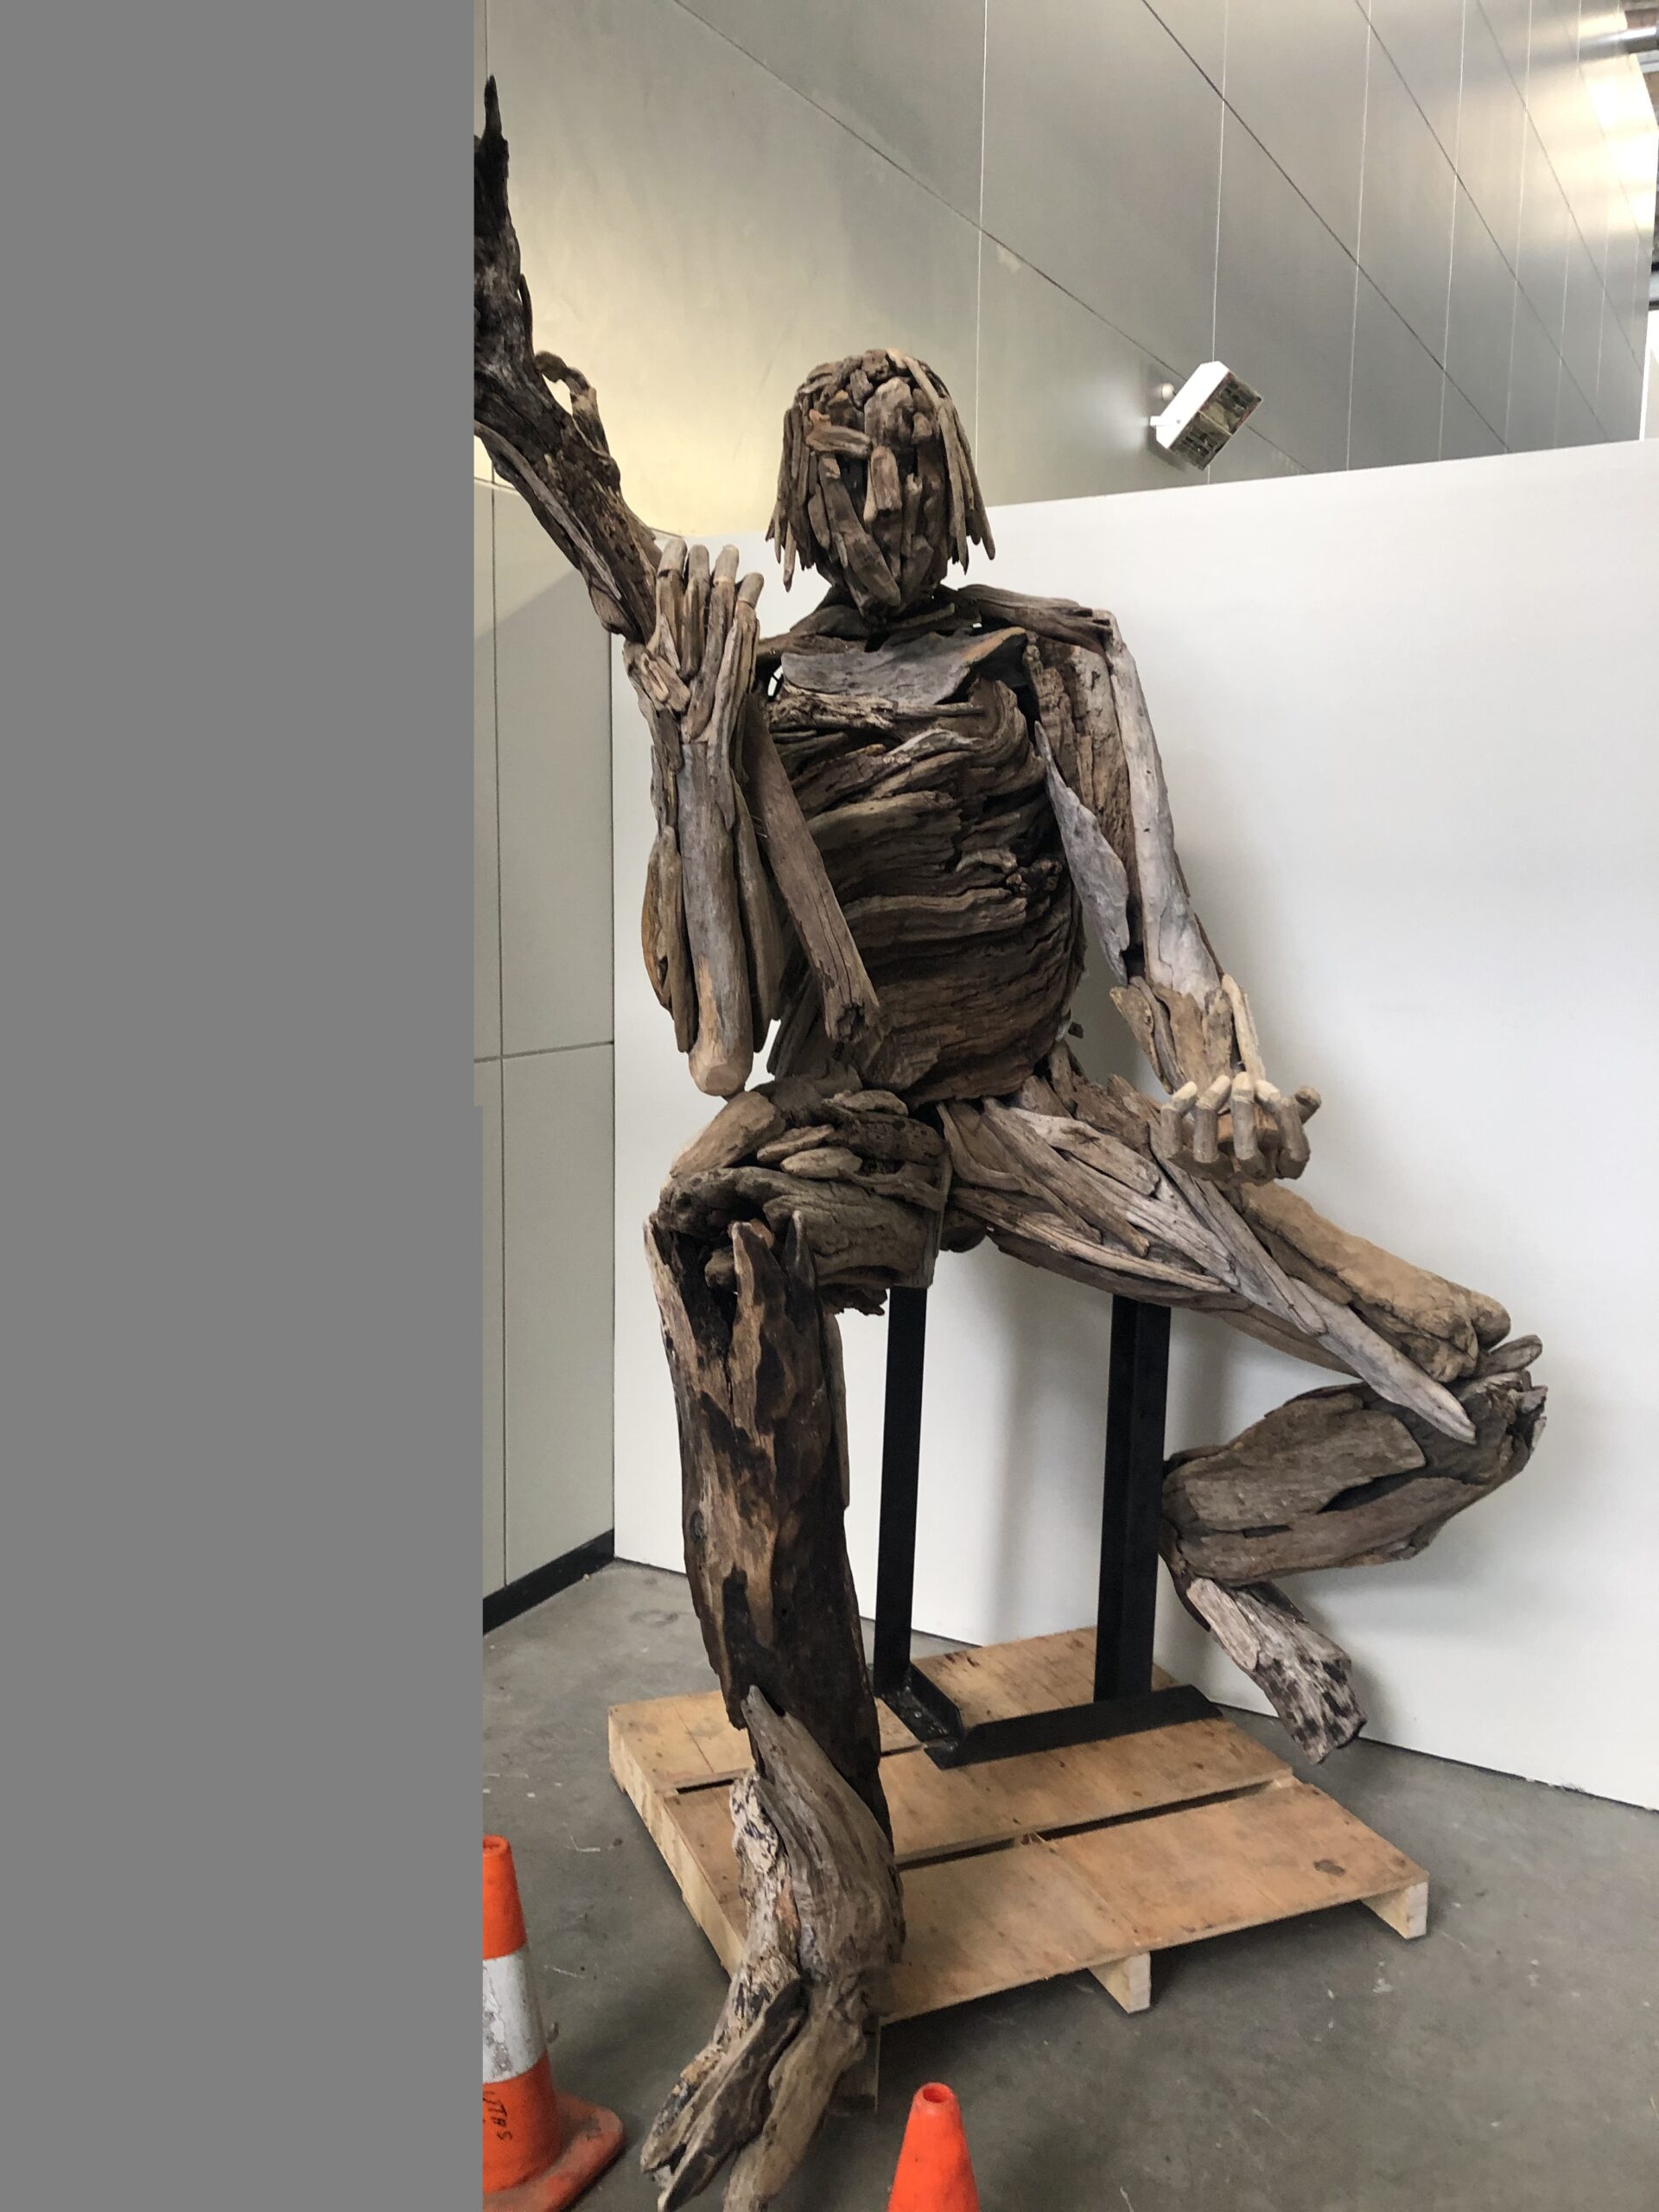 Image of Sitting Man Driftwood sculpture by Dean Greeno in his Artist Profile Story with Art Trails Tasmania